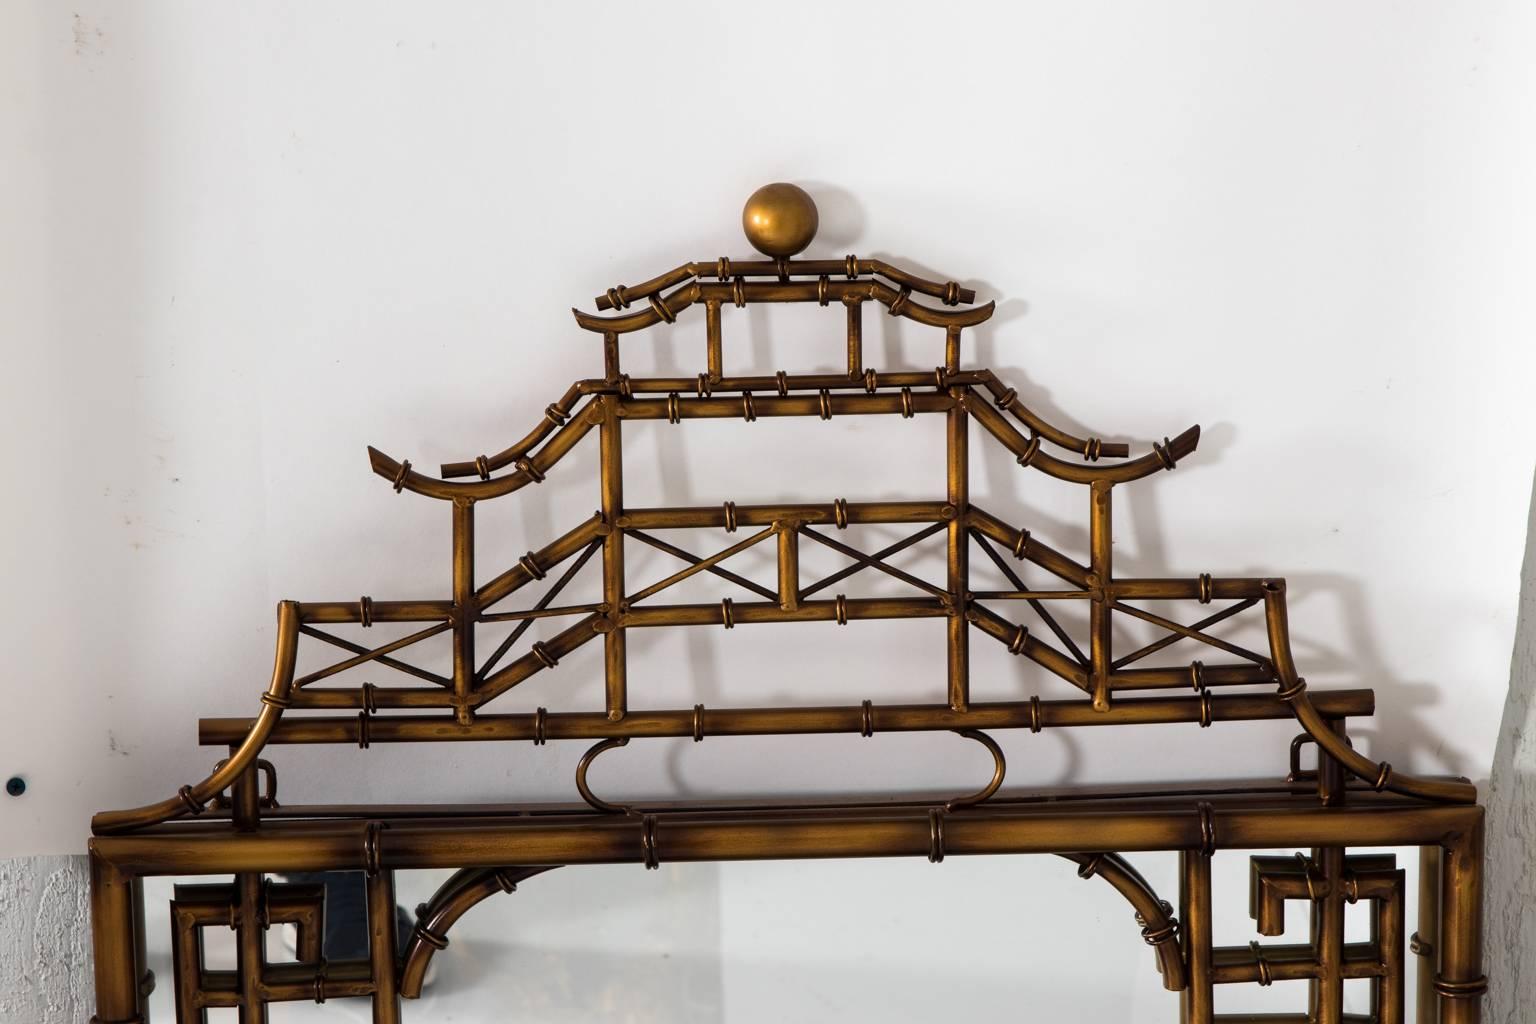 Pair of brass chinoiserie style mirrors with a pagoda roof on the crown in a faux-bamboo finish, circa 20th century.
 